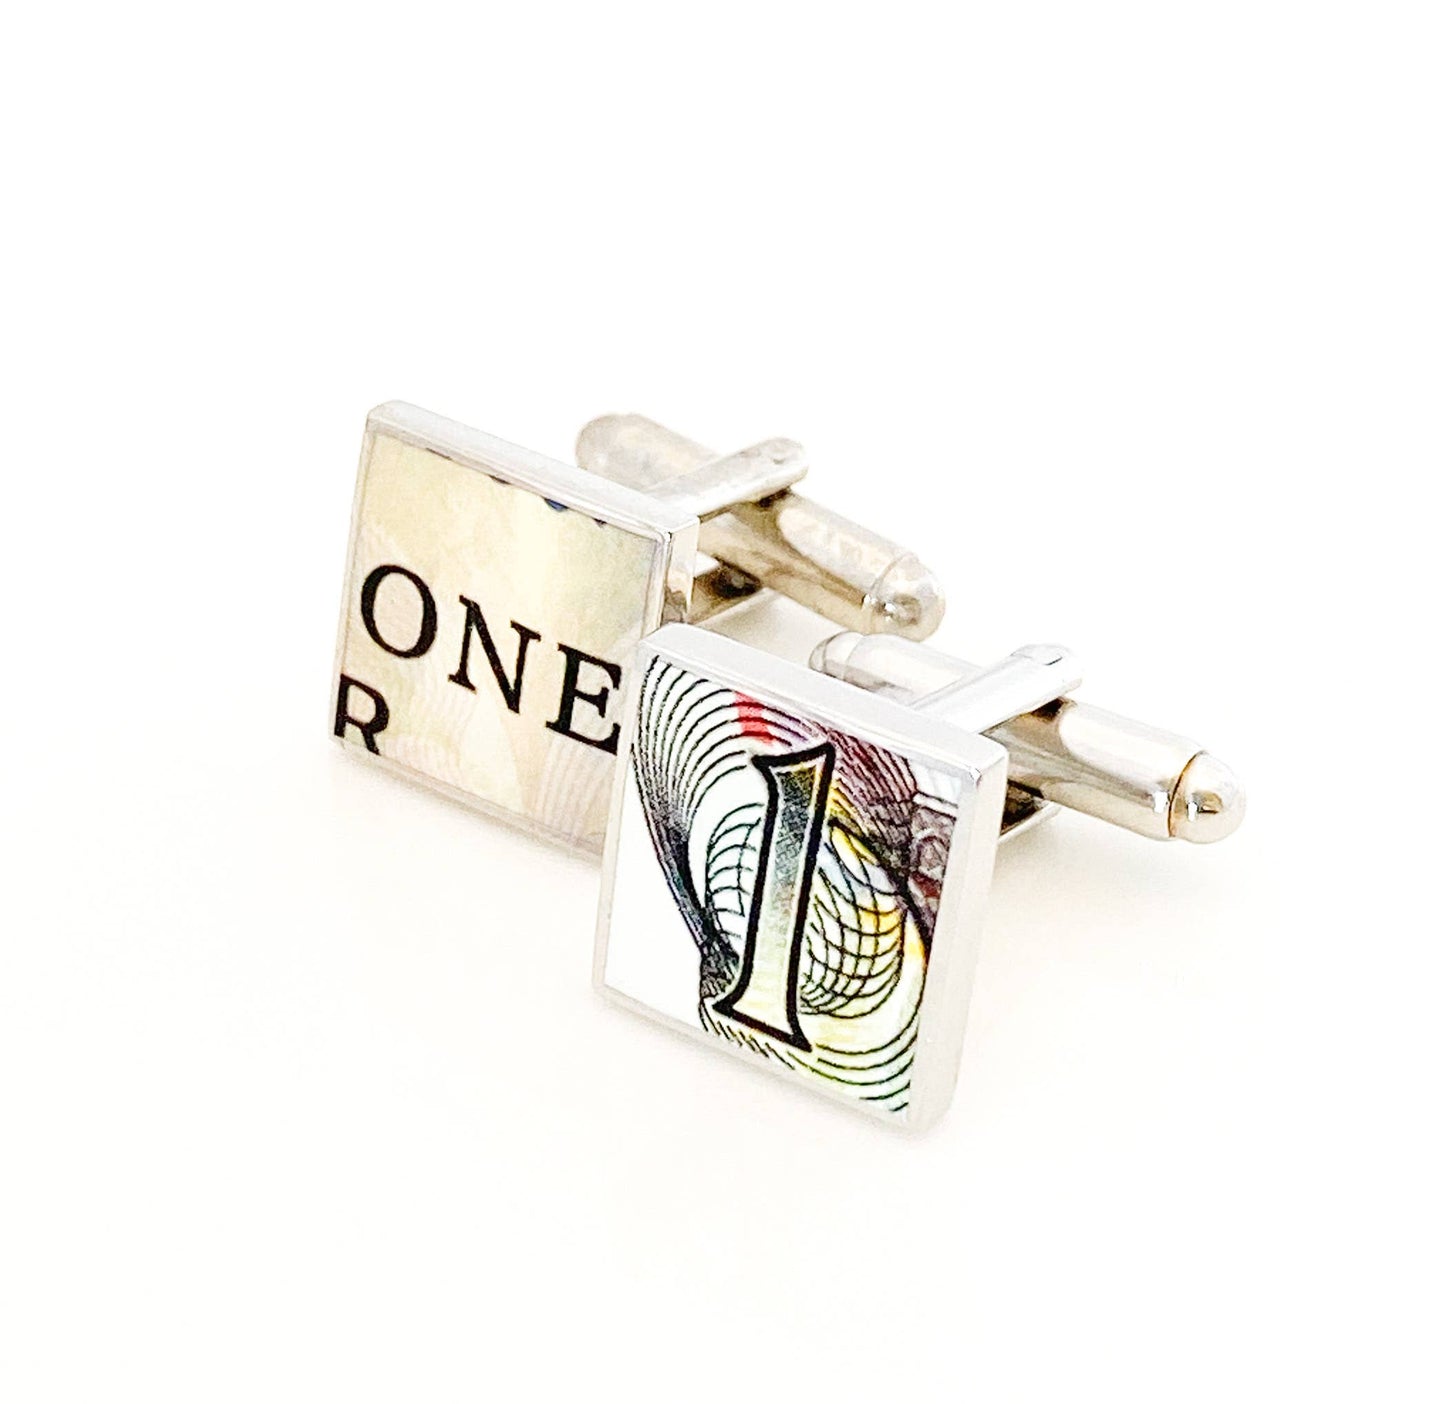 Load image into Gallery viewer, Square cufflinks with 1 and ONE from Canadian dollar bill
